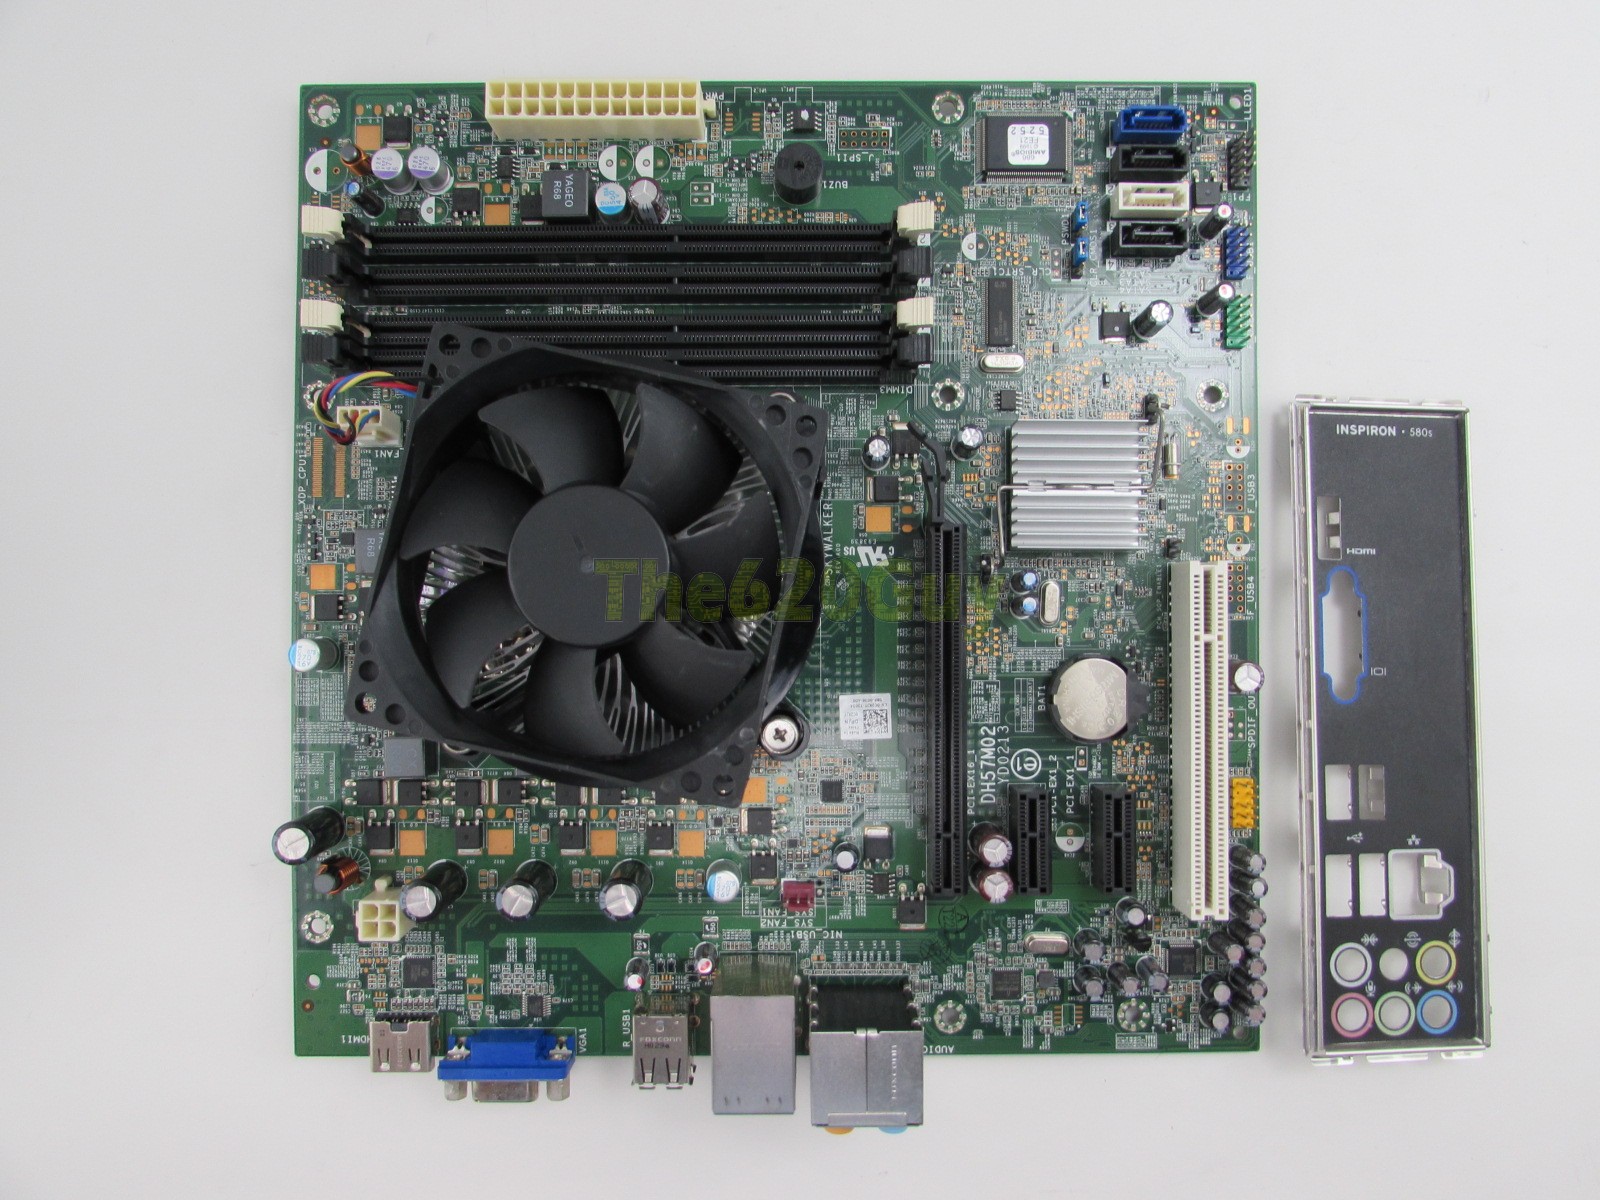 Dell Inspiron 580s DH57M02 Motherboard C2KJT + i3-550 3.2GHz CPU + HSF